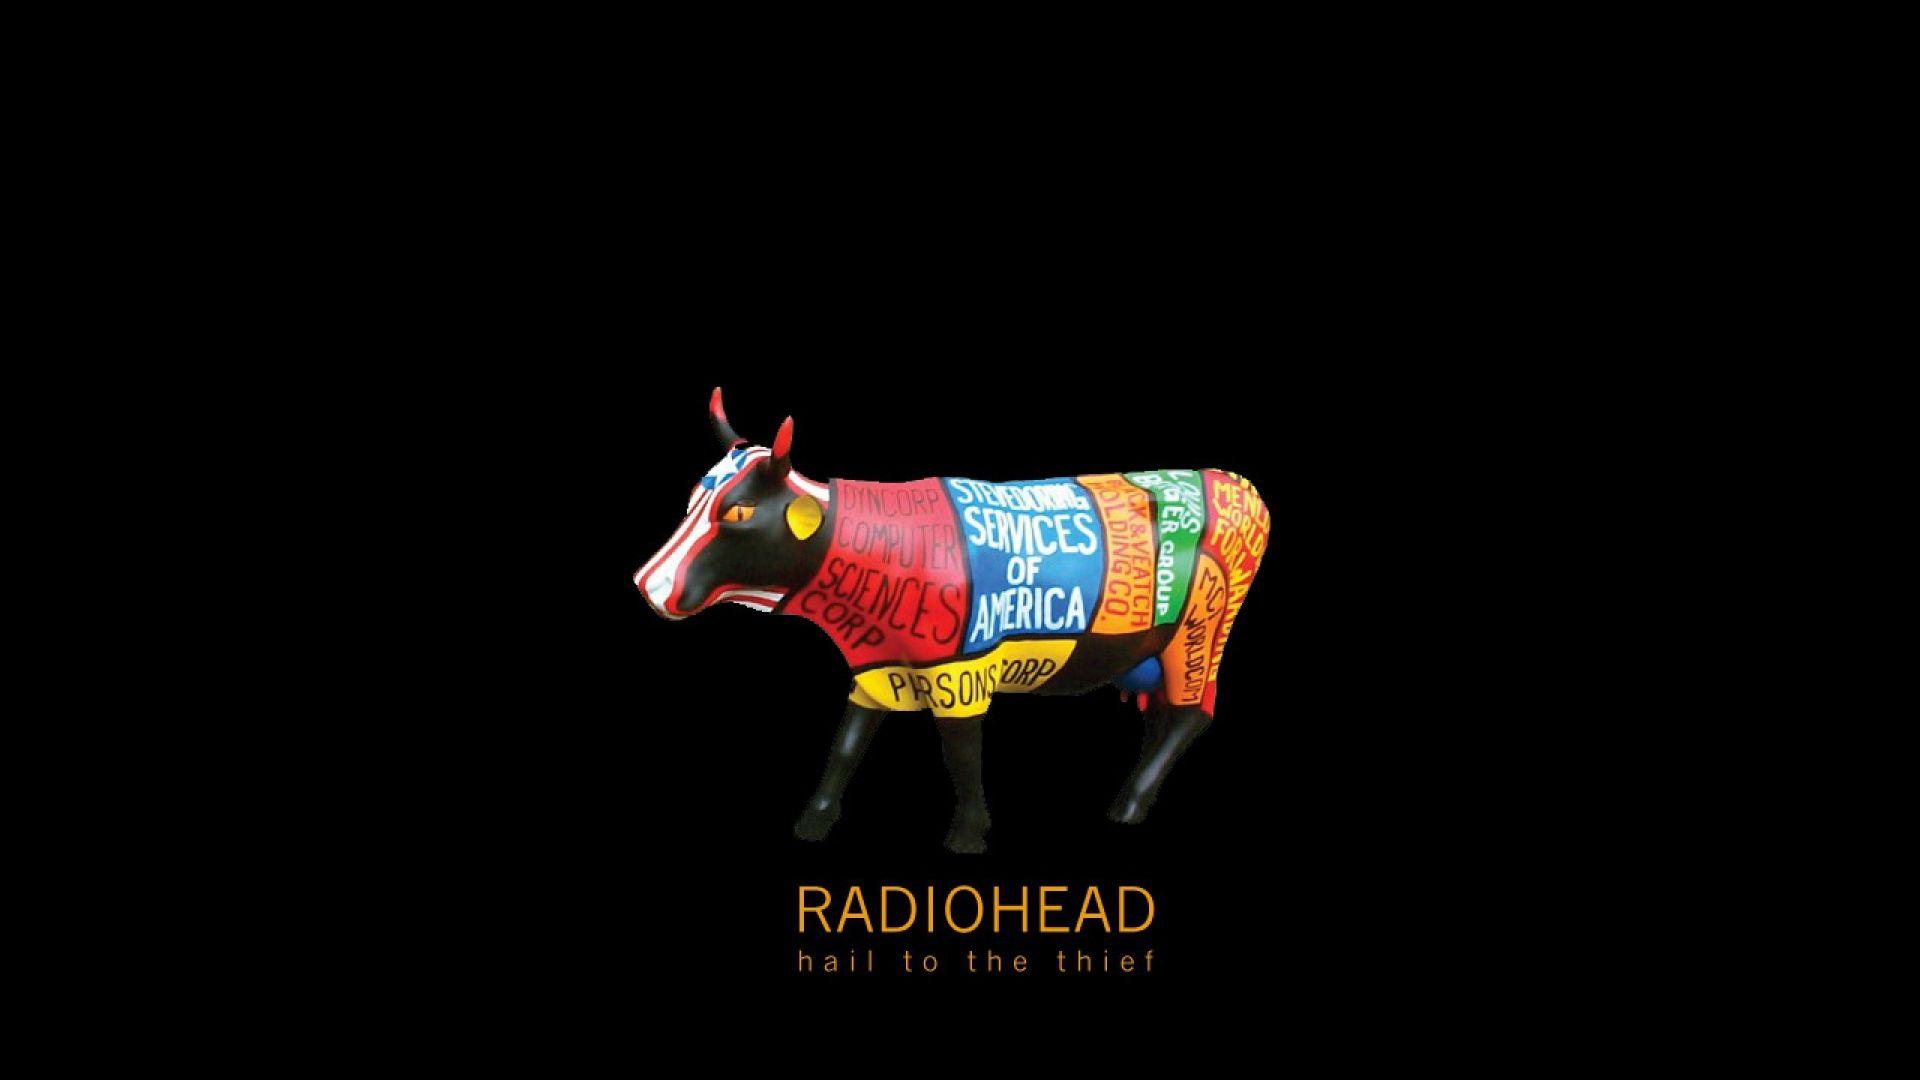 Download Wallpaper 1920x1080 radiohead, cow, cover, sign, letters